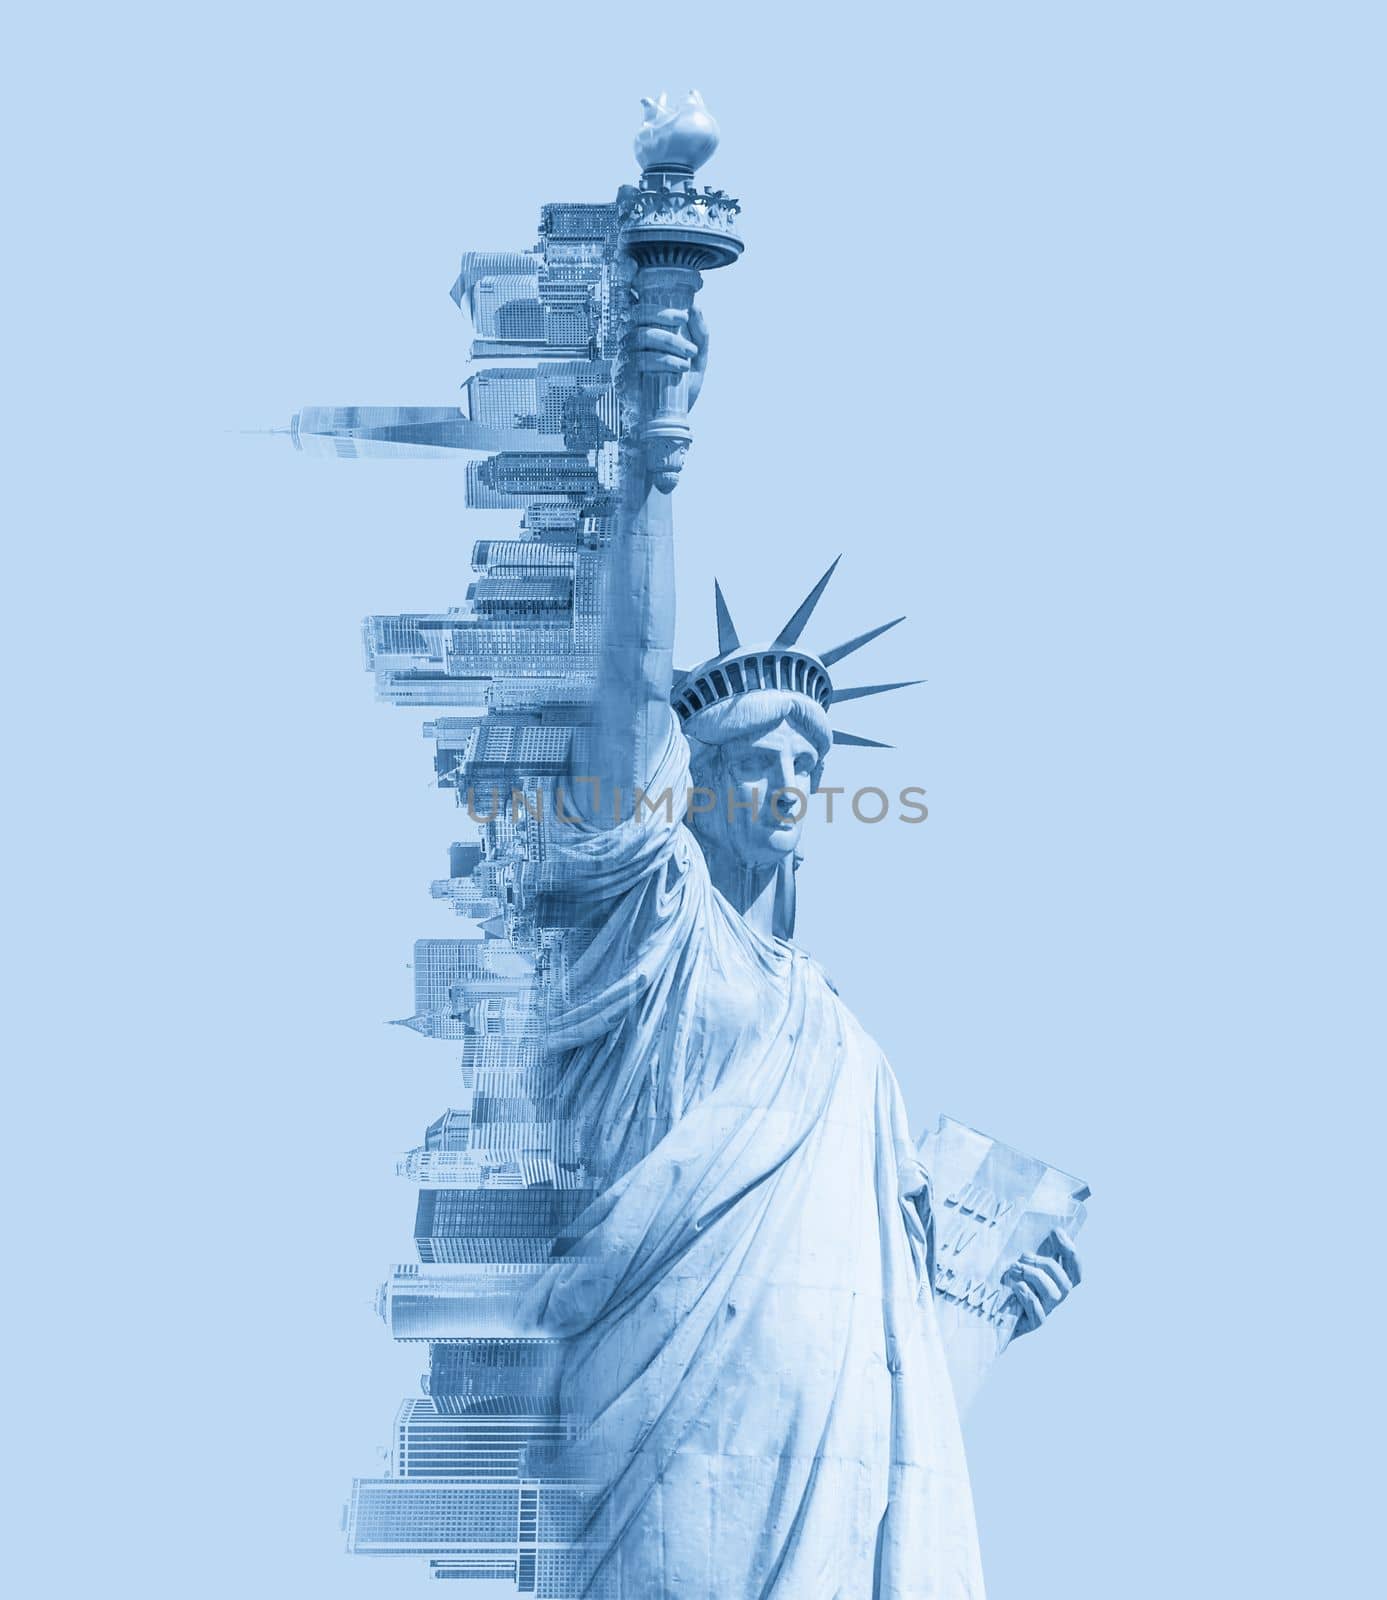 Double exposure image of the Statue of Liberty and new york skyline with cope space